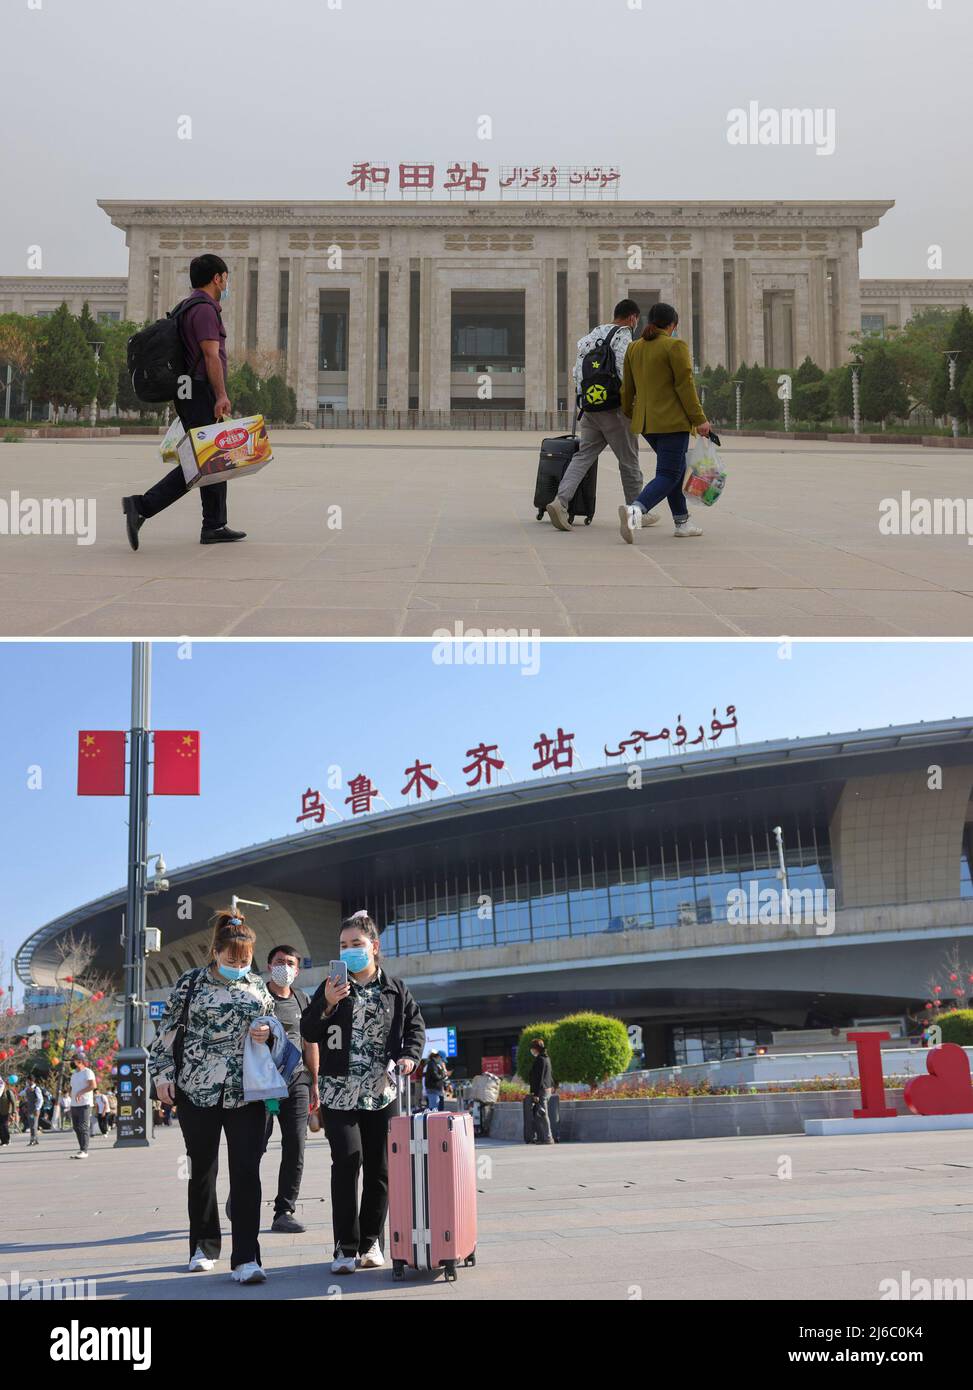 (220430) -- KASHGAR, April 30, 2022 (Xinhua) -- This combo photo shows (top) passengers walking to Hotan Railway Station in Hotan, northwest China's Xinjiang Uygur Autonomous Region, April 28, 2022 , and (bottom) passengers walking out of Urumqi Railway Station in Urumqi, northwest China's Xinjiang Uygur Autonomous Region, April 29, 2022,  As bullet trains zoom through stations in many parts of China, the seemingly outdated, rumbling slow-speed trains have continued to serve residents of remote areas with stable ticket prices and services.   Though home to the world's most developed high-speed Stock Photo